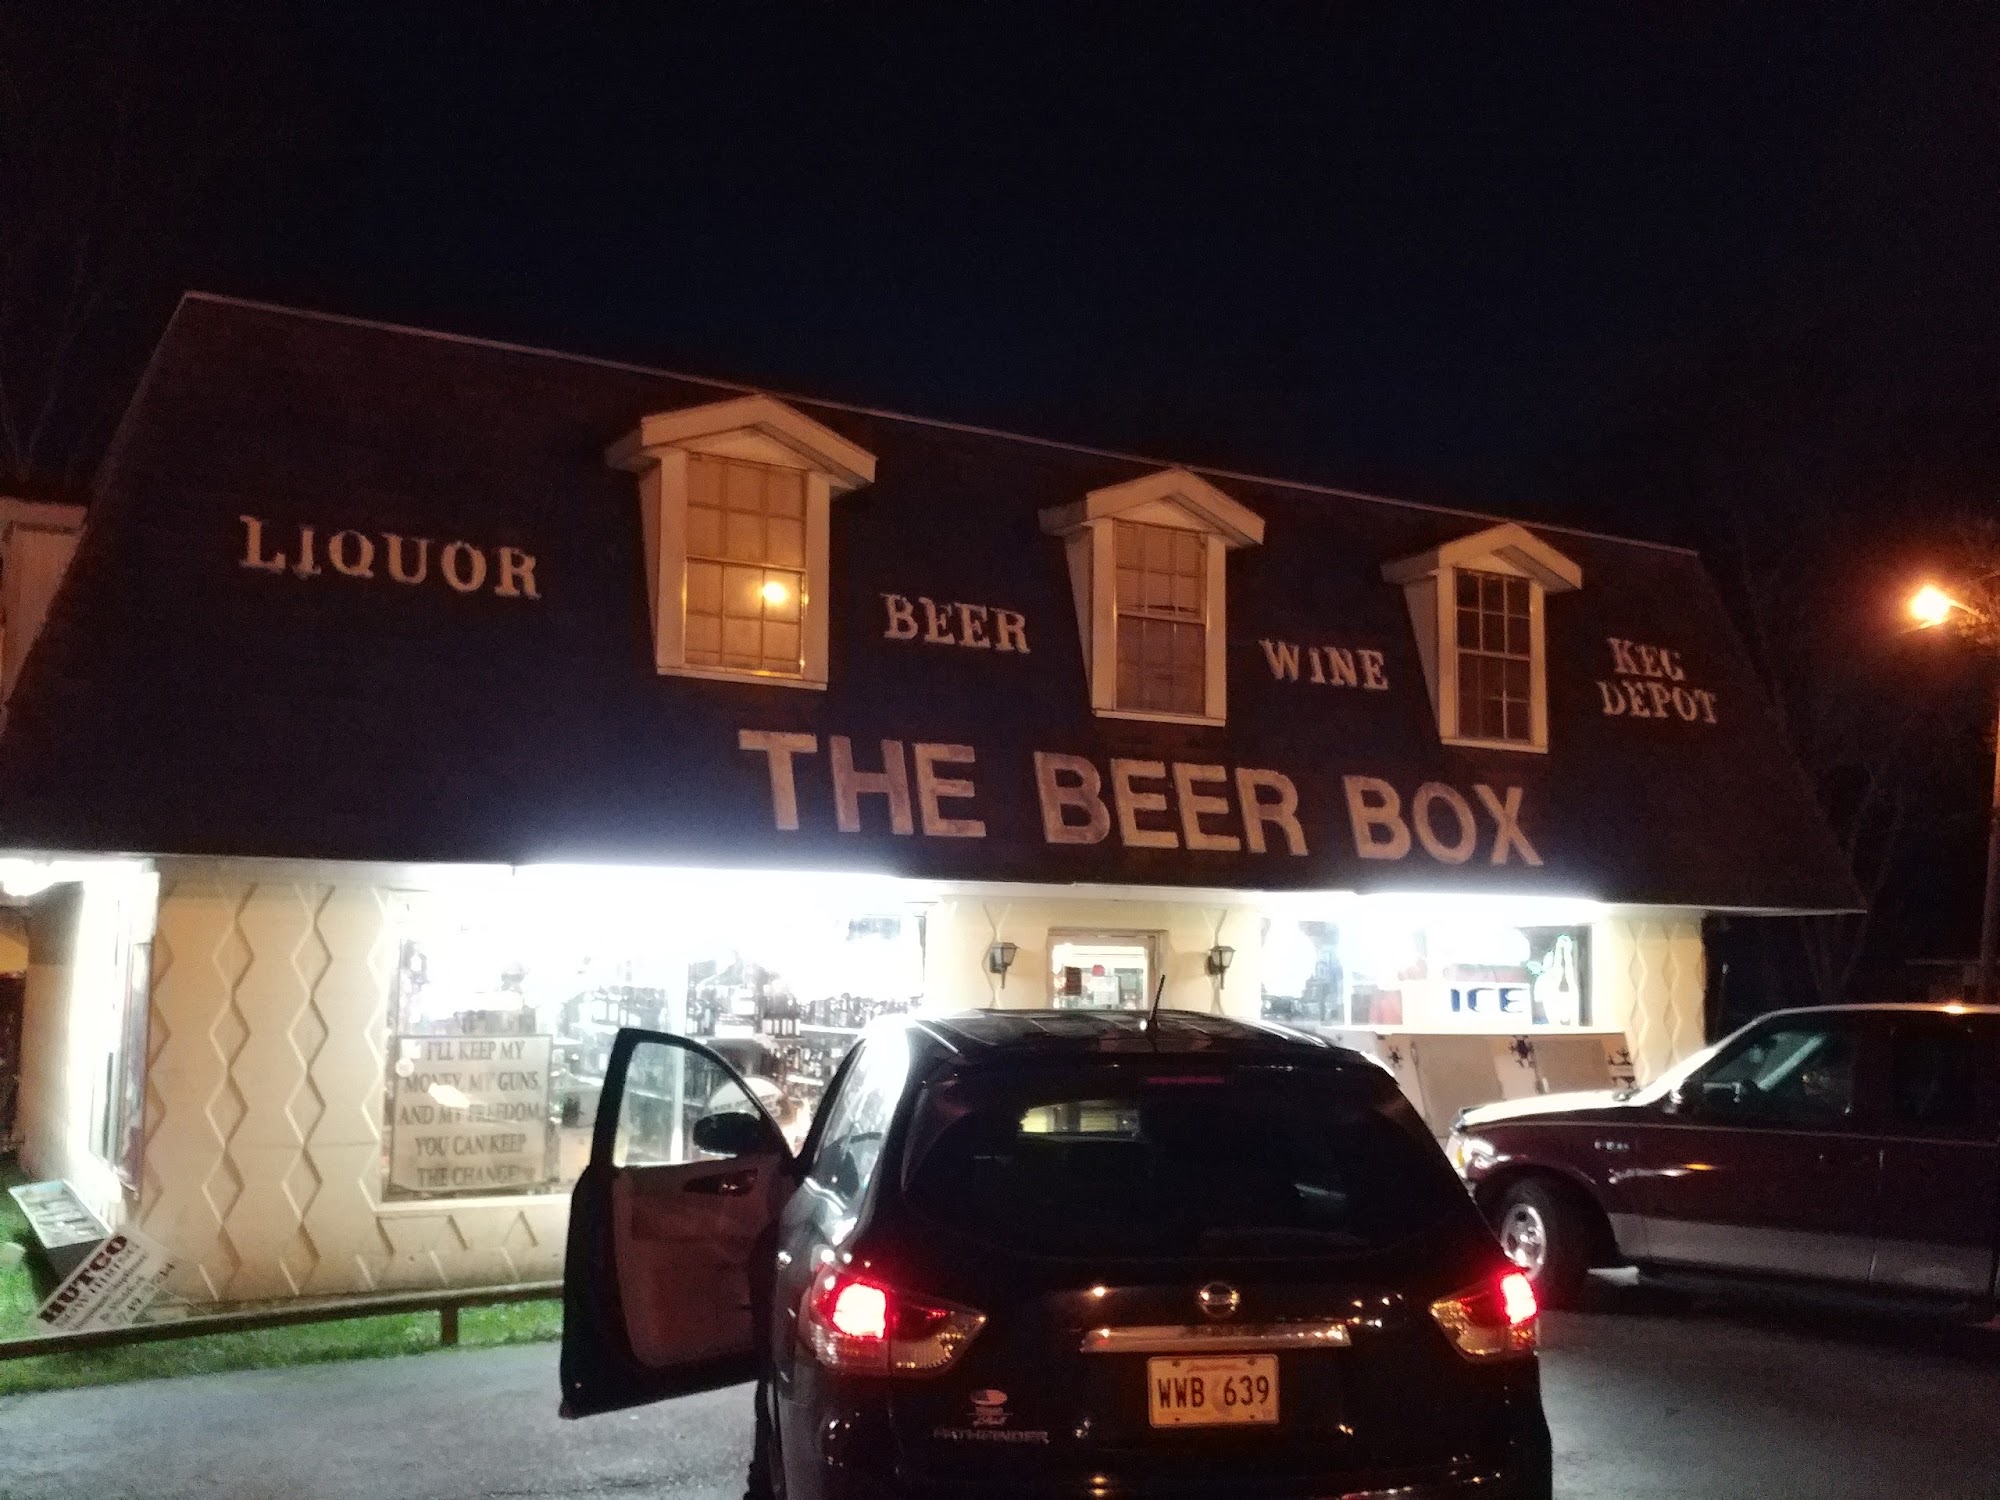 The Beer Box